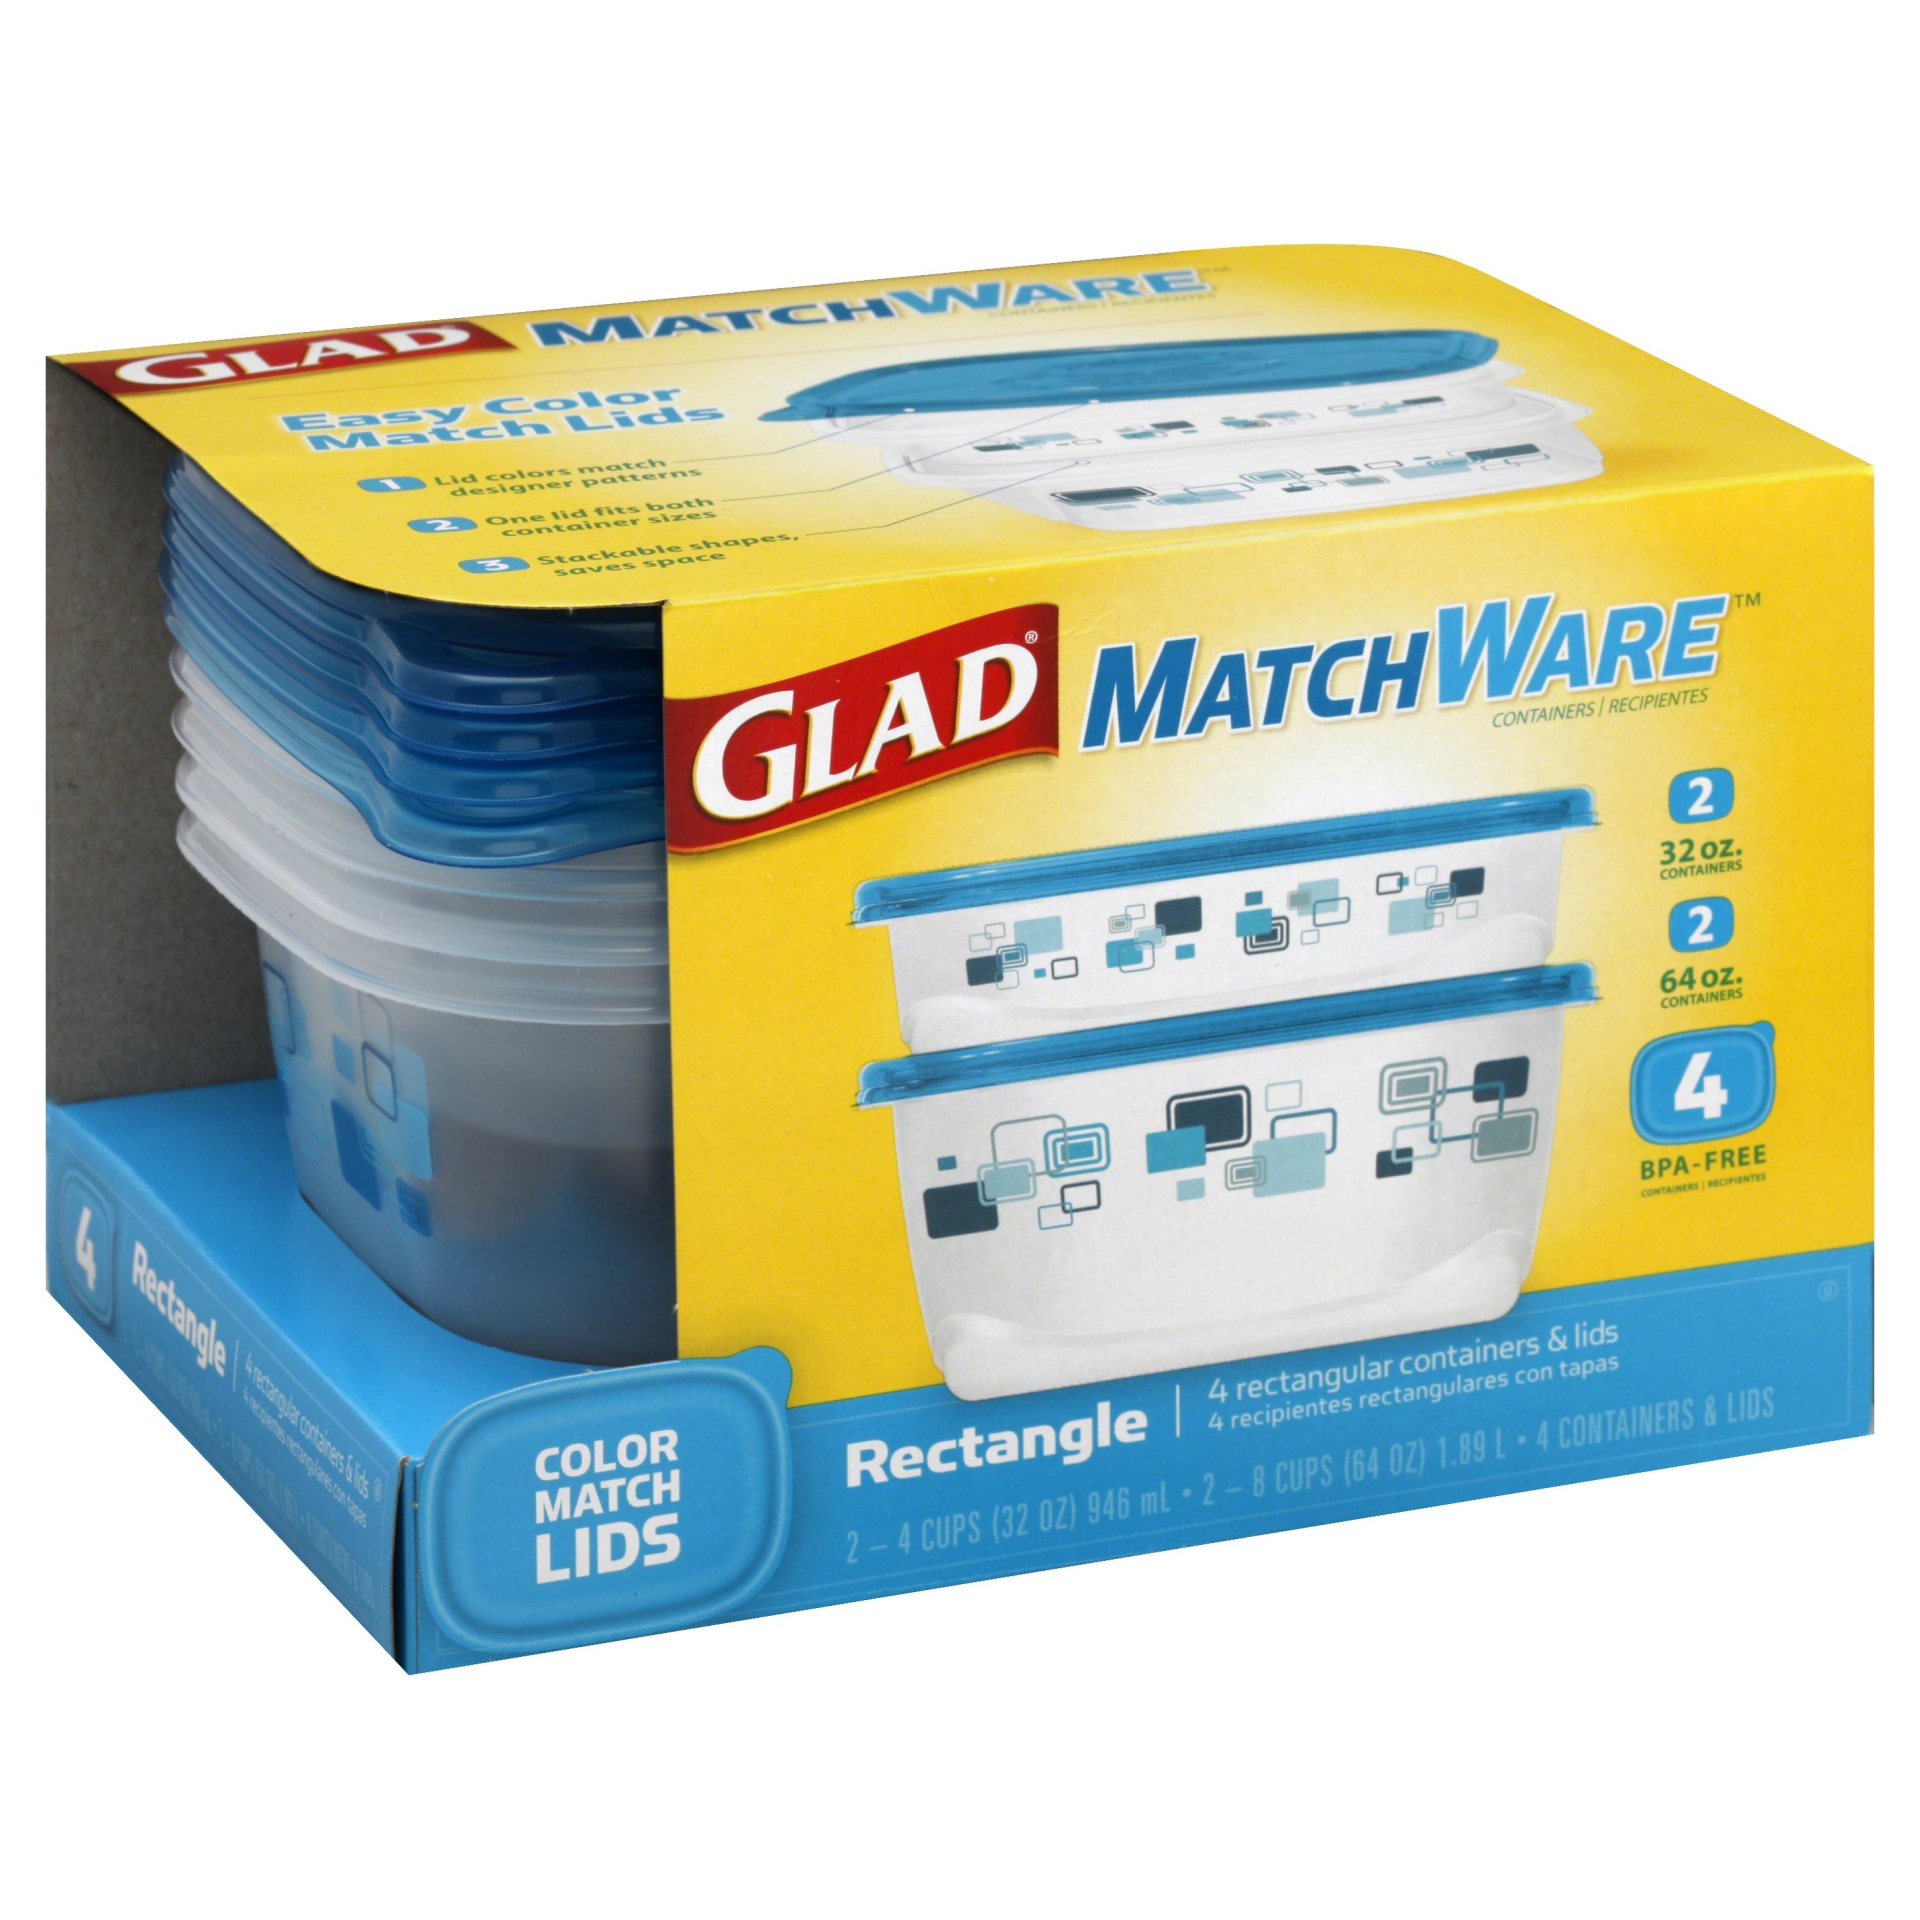 Glad Matchware Rectangular Containers & Lids - 4 ct